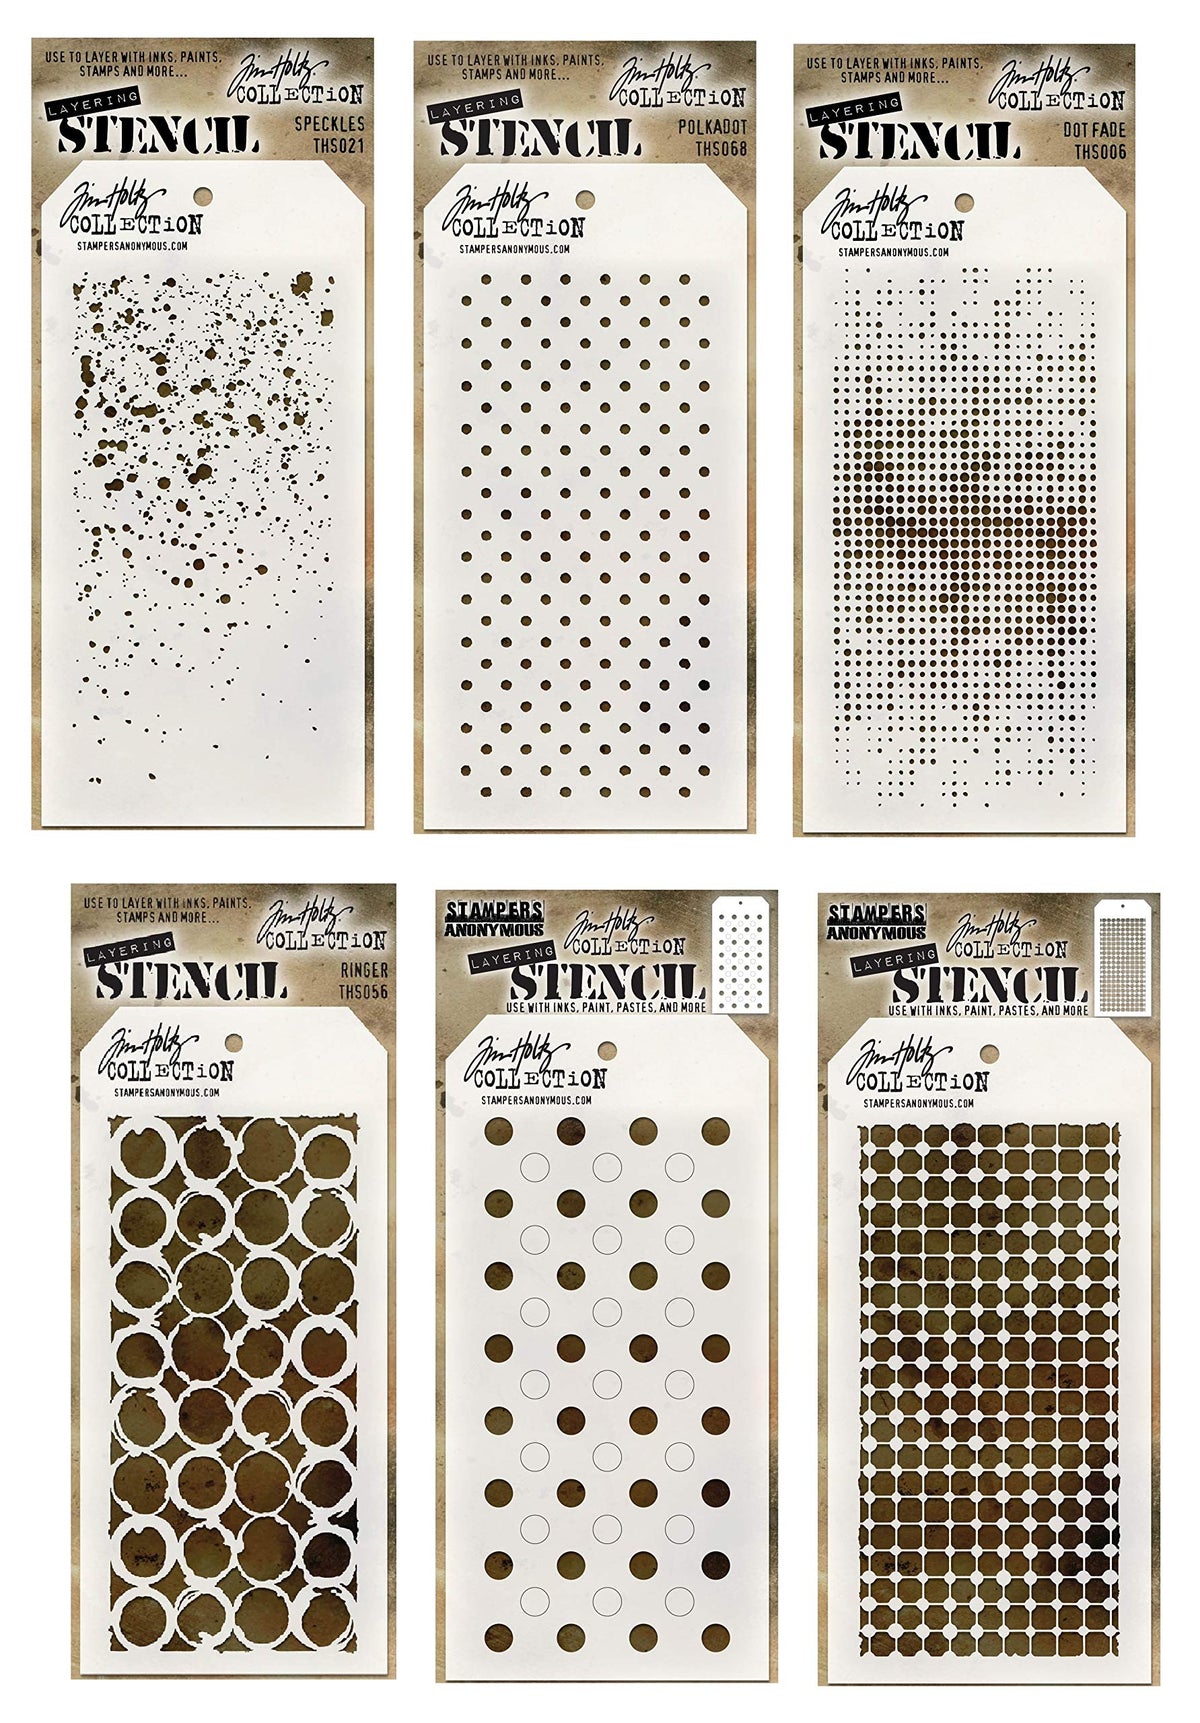  CRAFTERS WORKSHOP 4 Mixed Media Stencils Set, for Arts, Card  Making, Journaling, Scrapbooking, 6 inch x 6 inch Templates